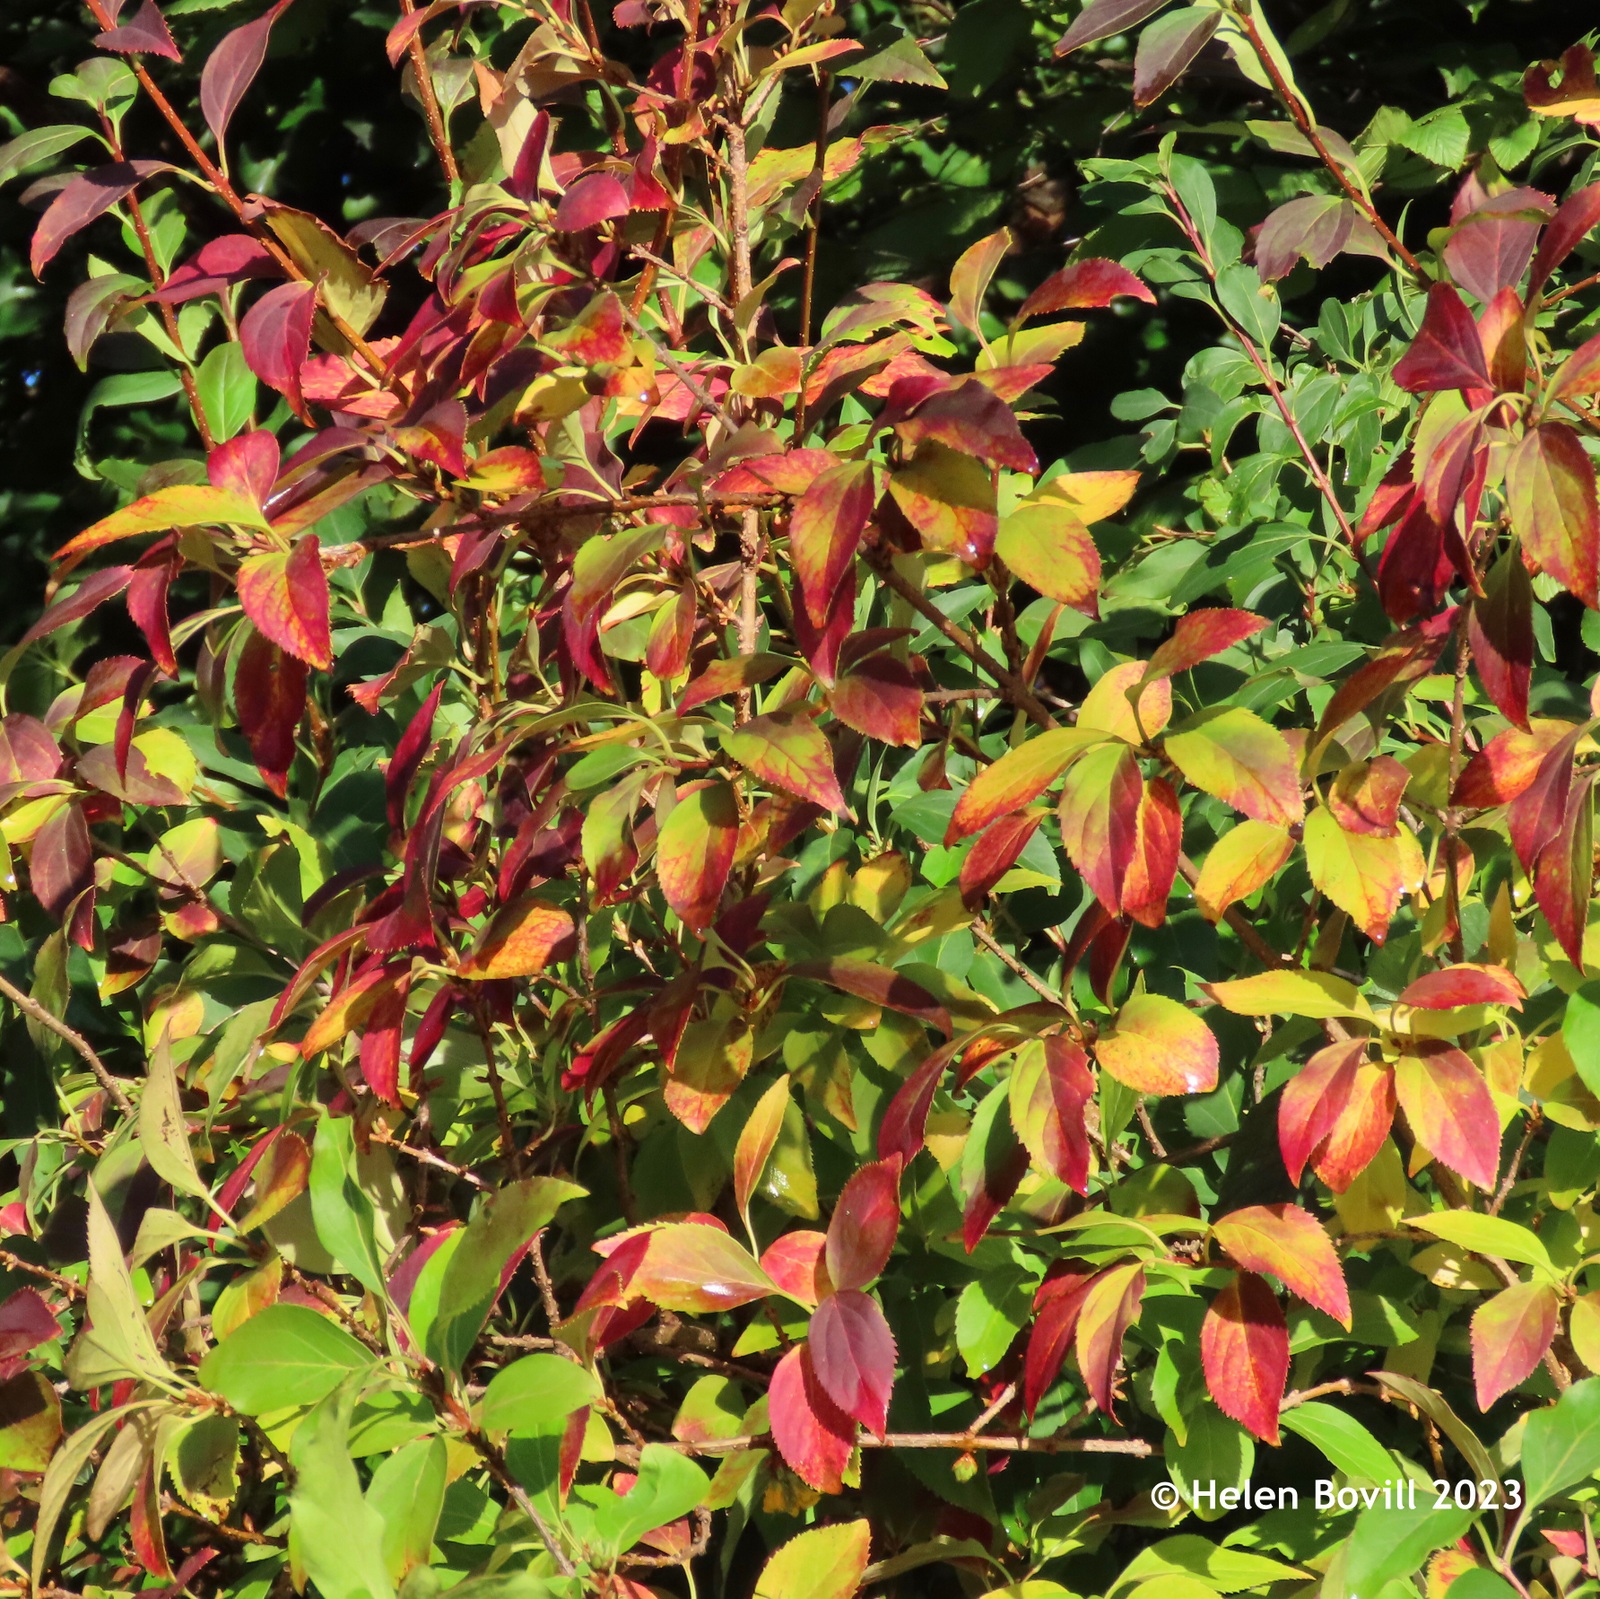 The bright autumnal colours of Forsythia leaves